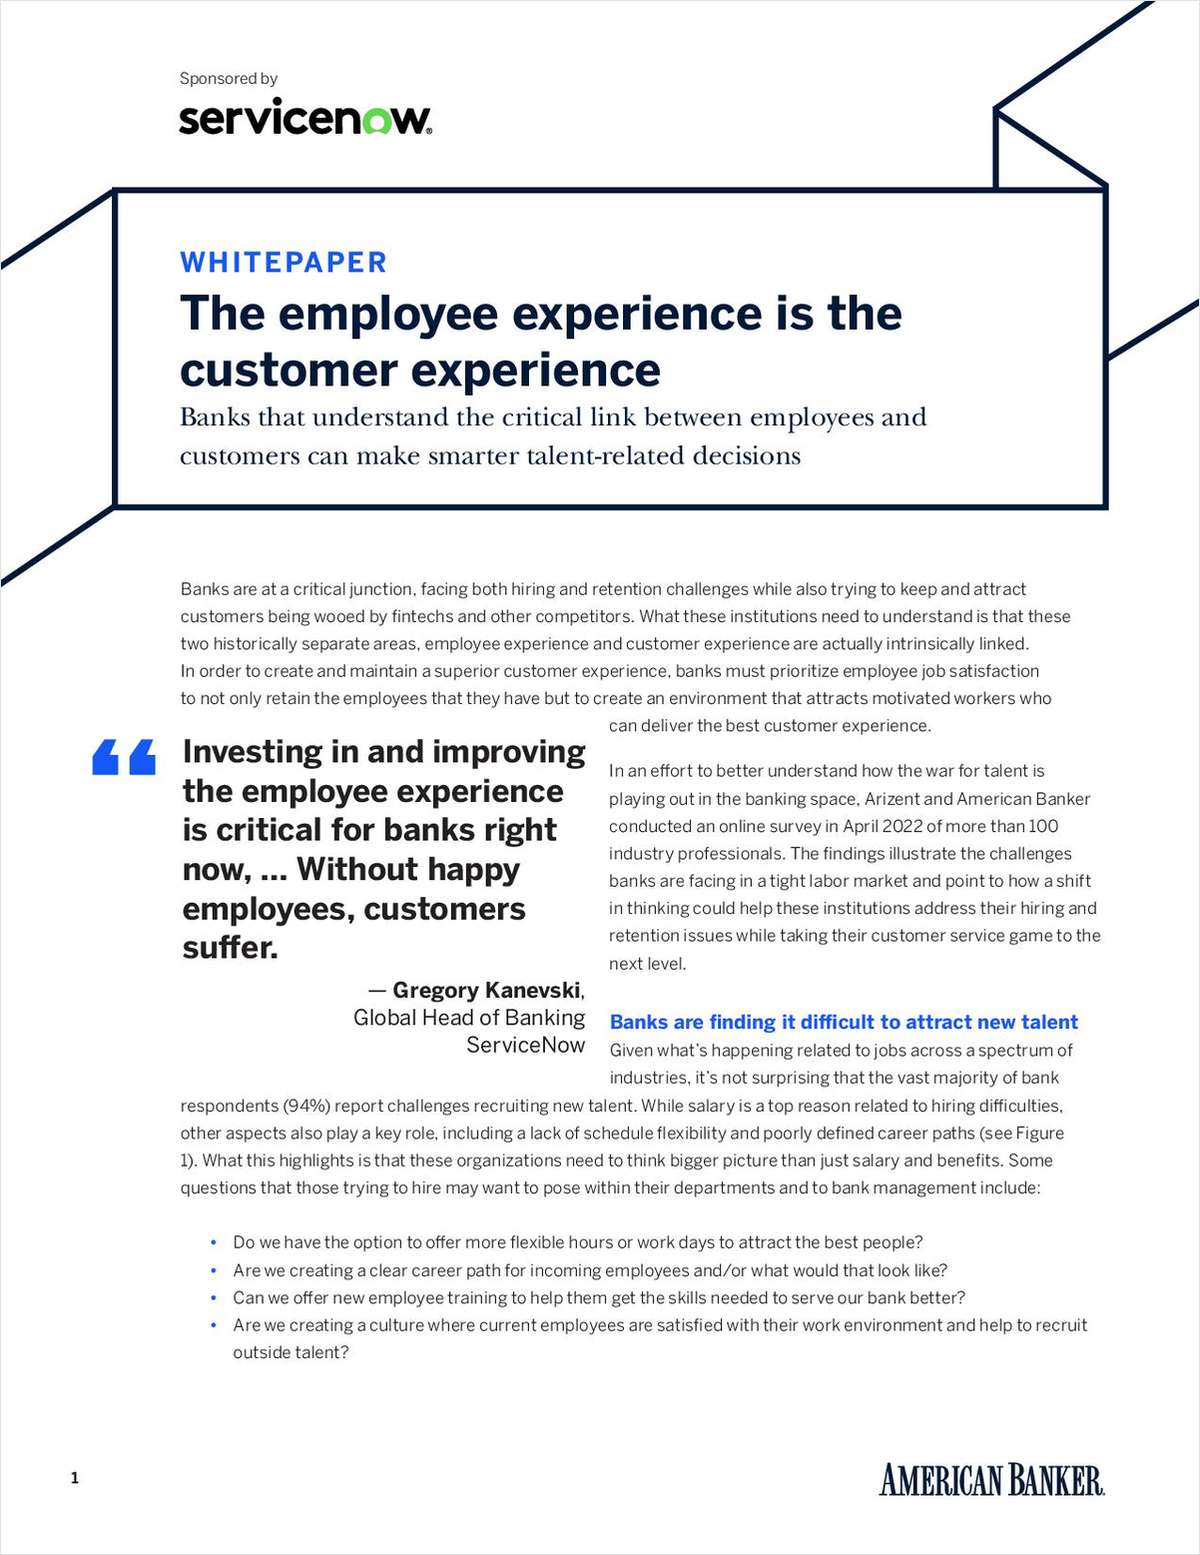 American Banker: The Employee Experience Is the Customer Experience